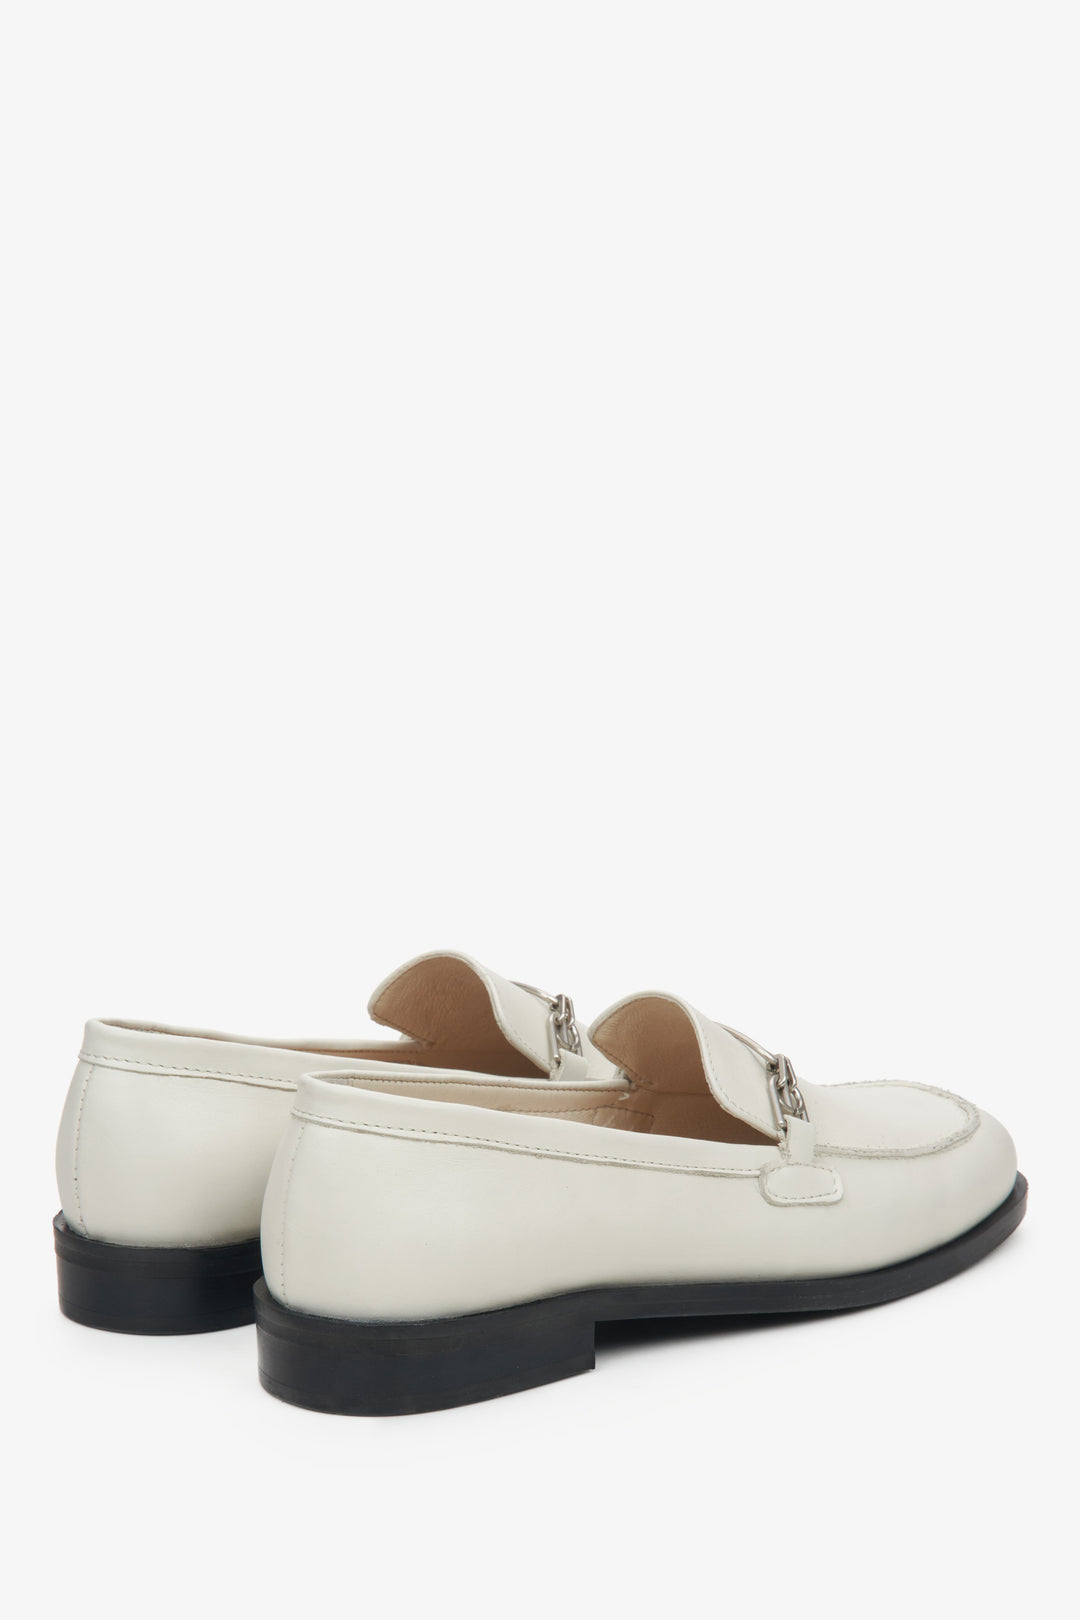 Estro women's beige  loafers - a close-up of the shoe's heel counter.